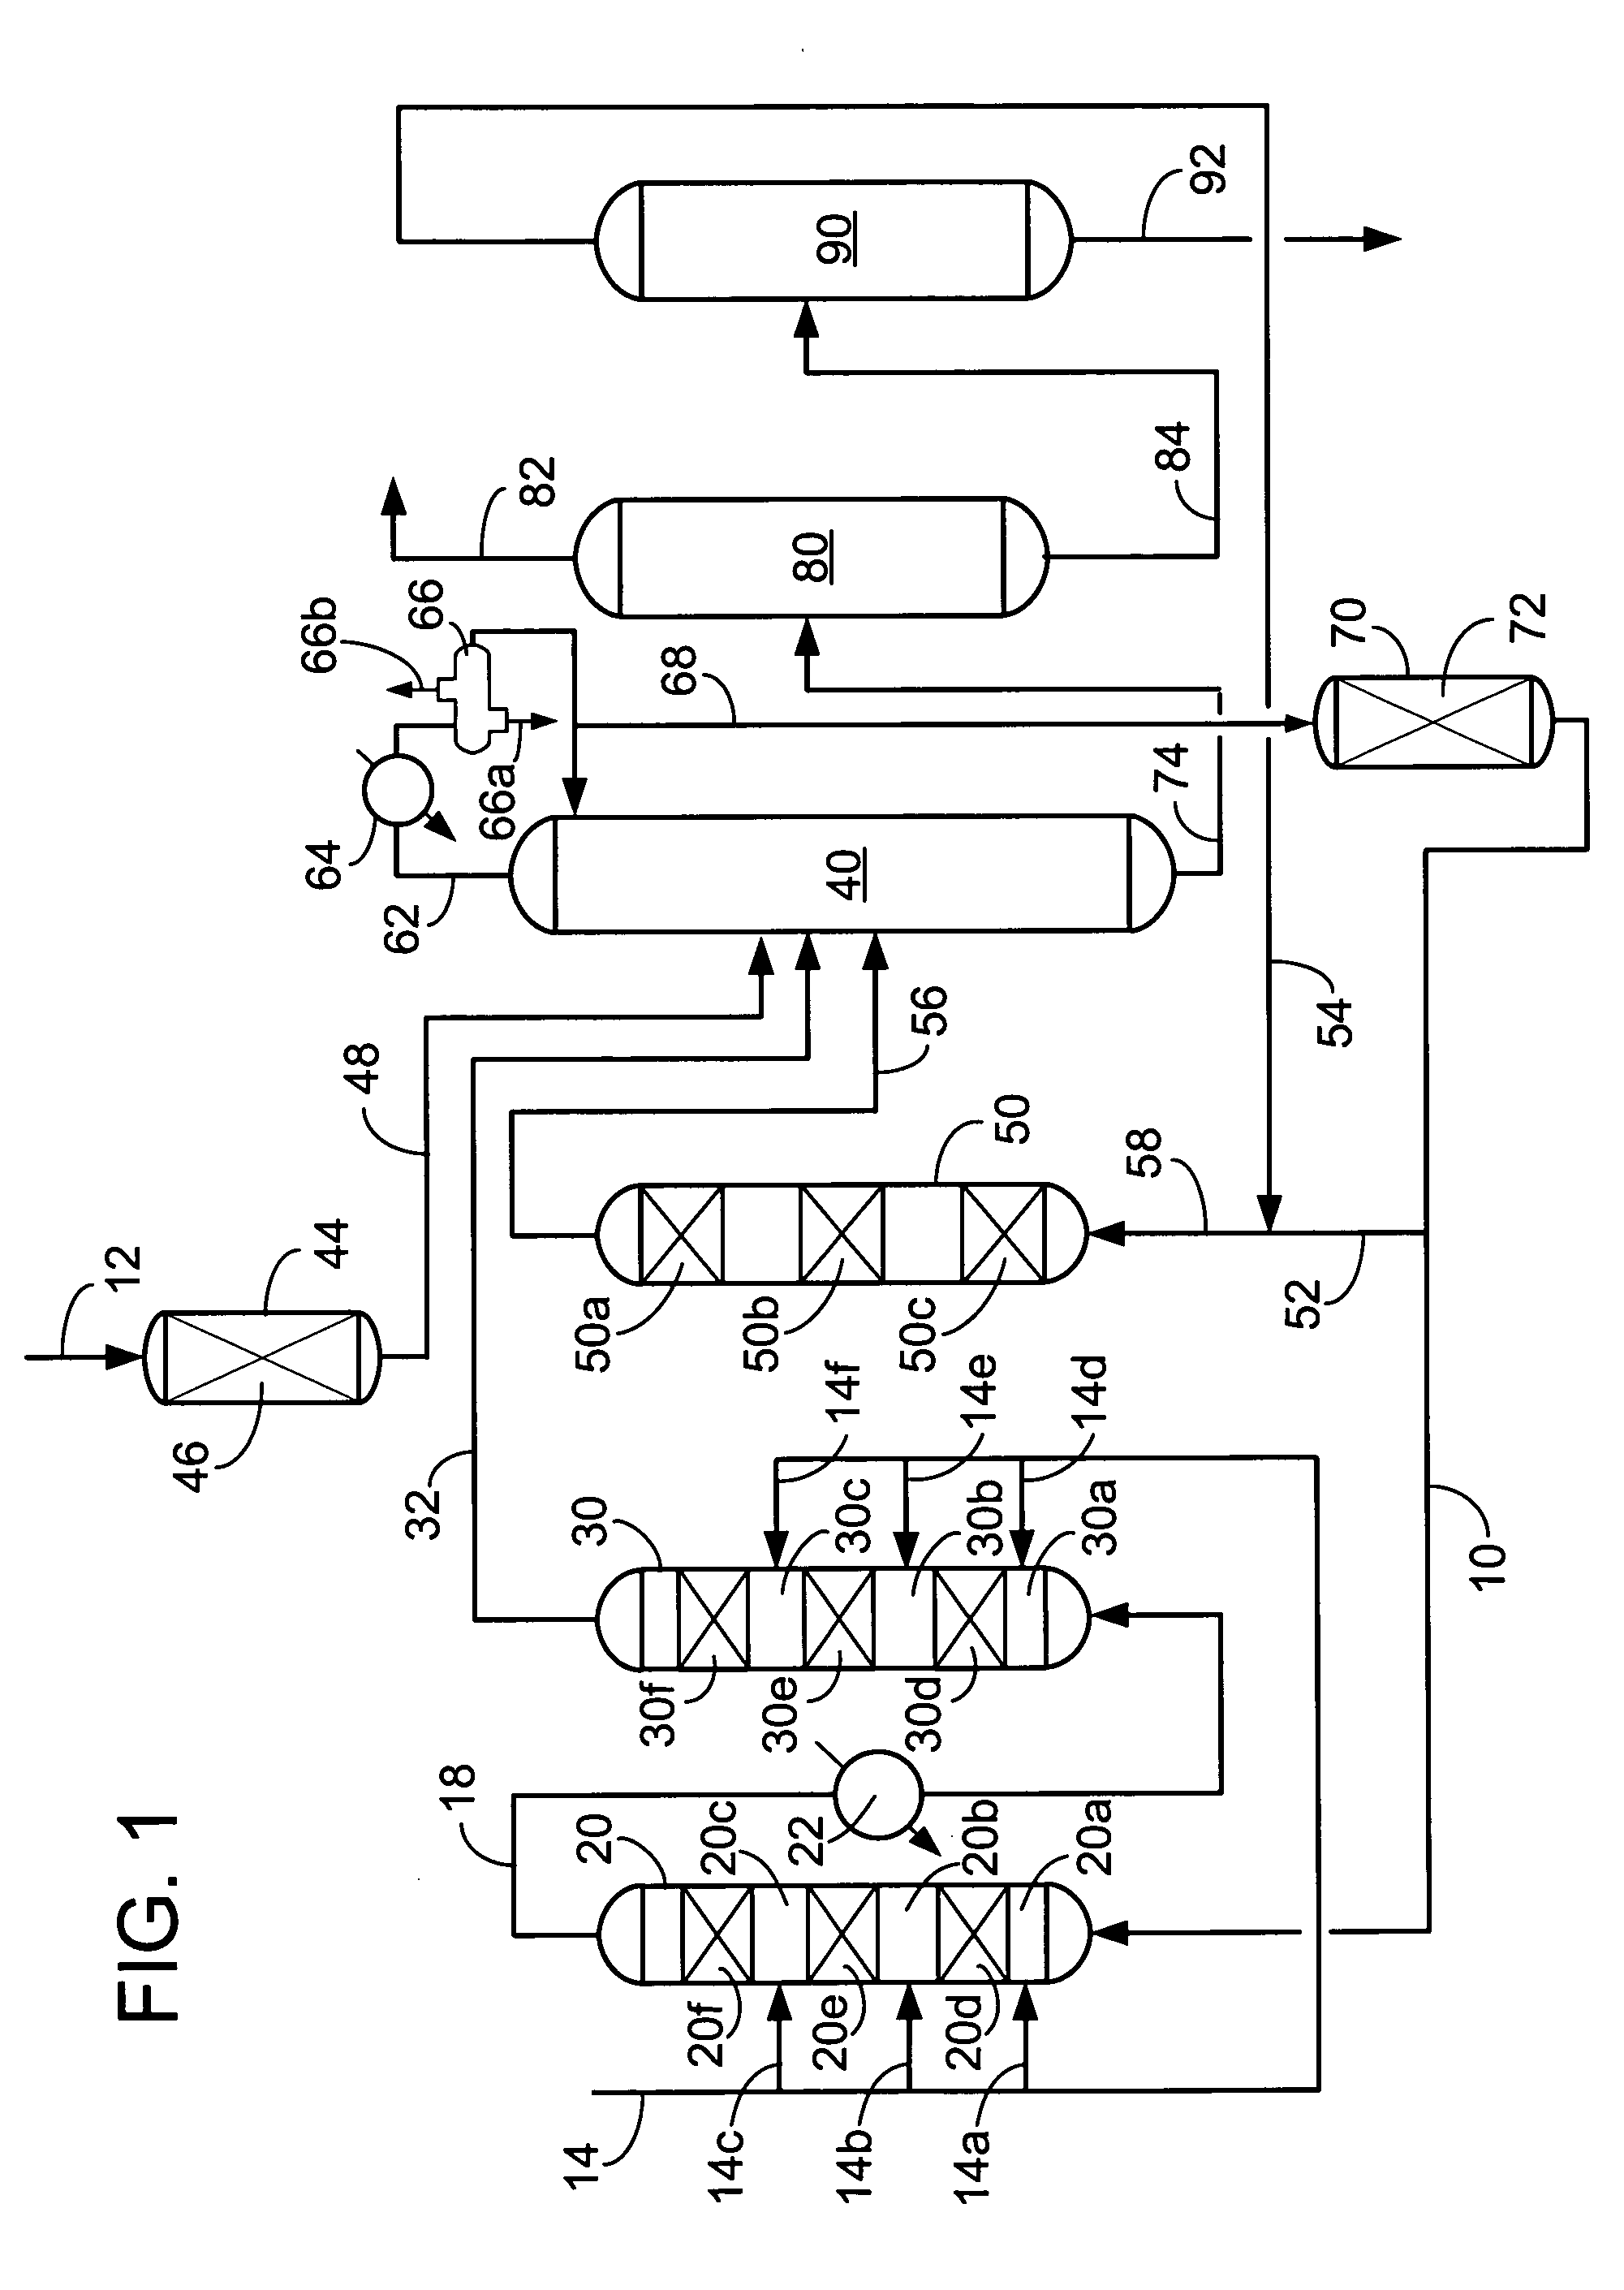 Process and apparatus for the removal of nitrogen compounds from a fluid stream